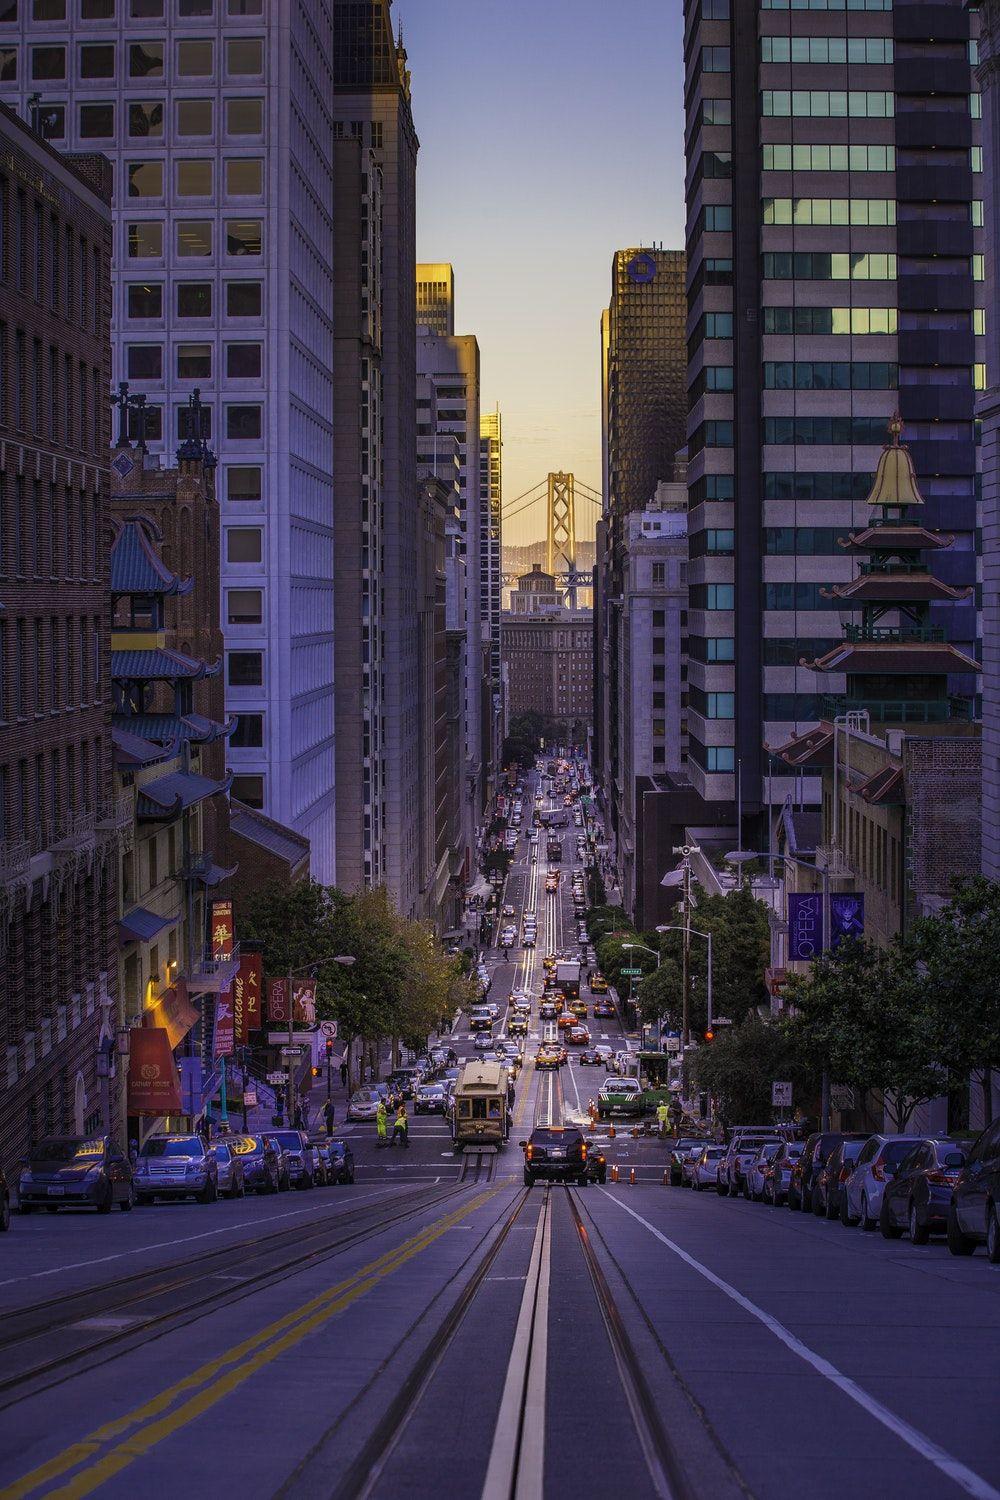 San Francisco Picture [Stunning]. Download Free Image